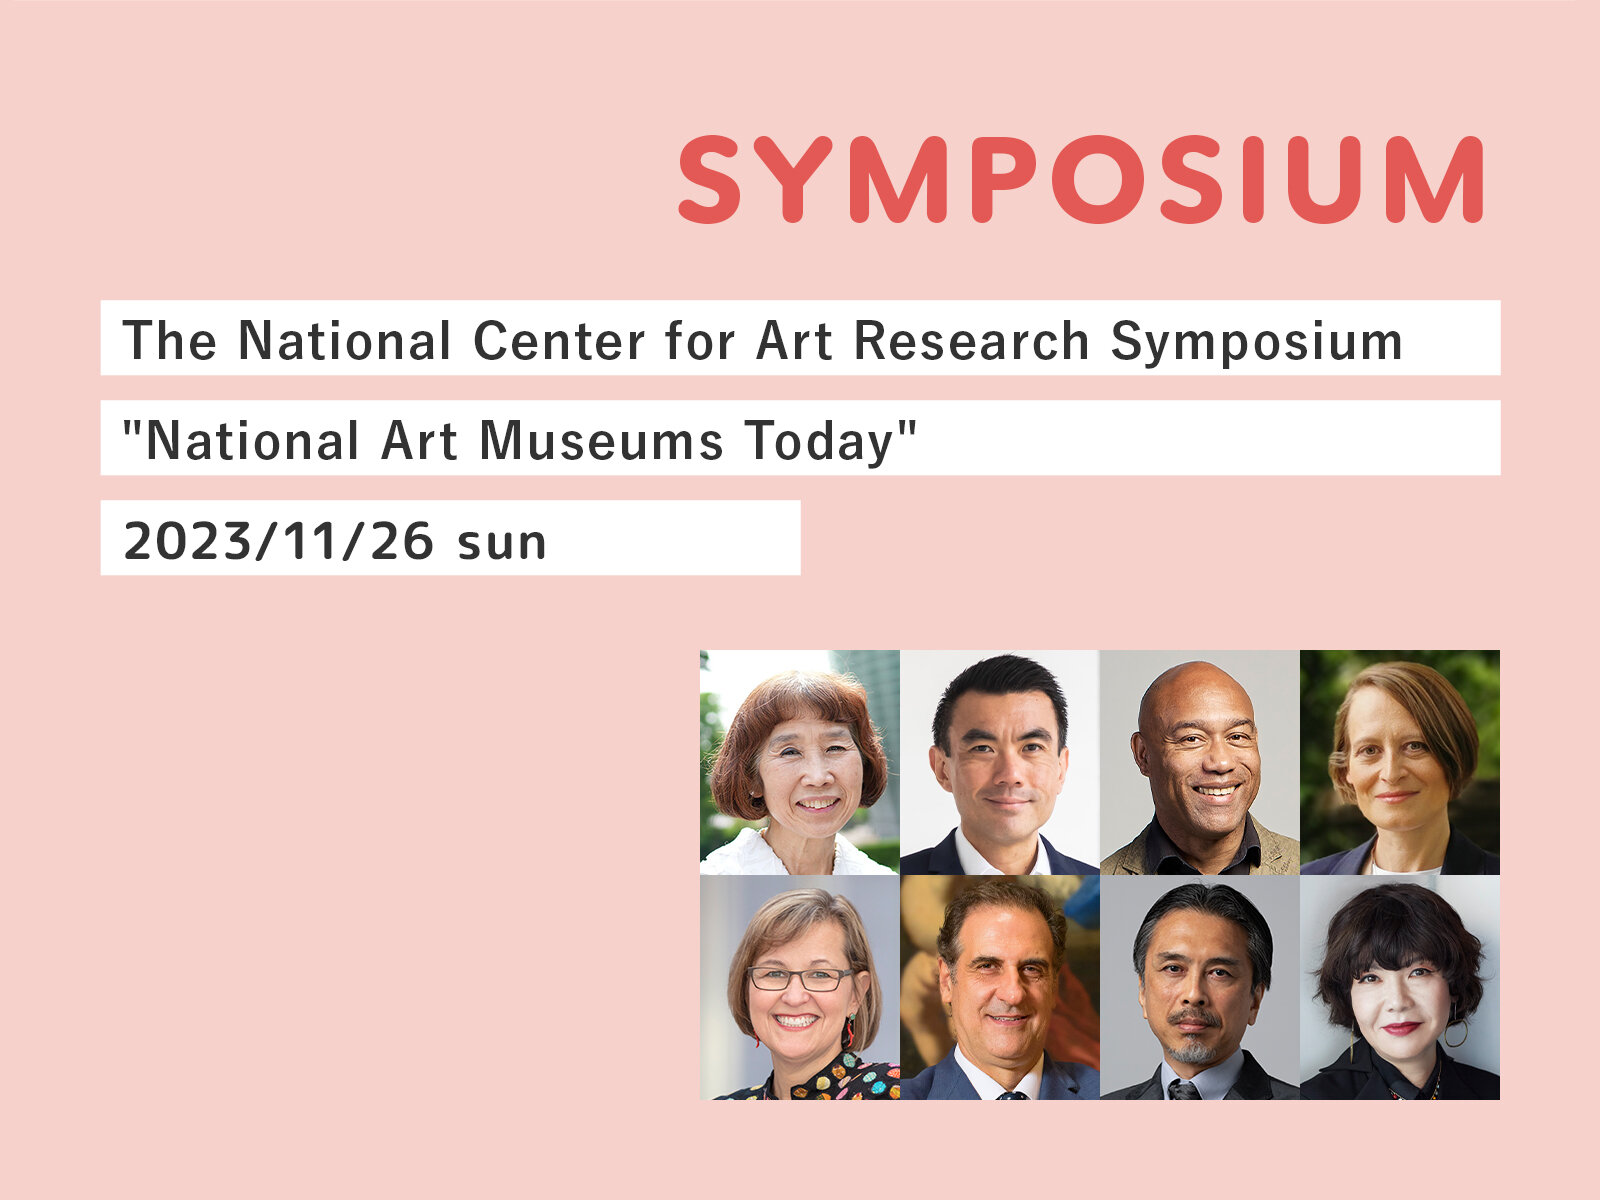 The National Center for Art Research hosts Symposium 